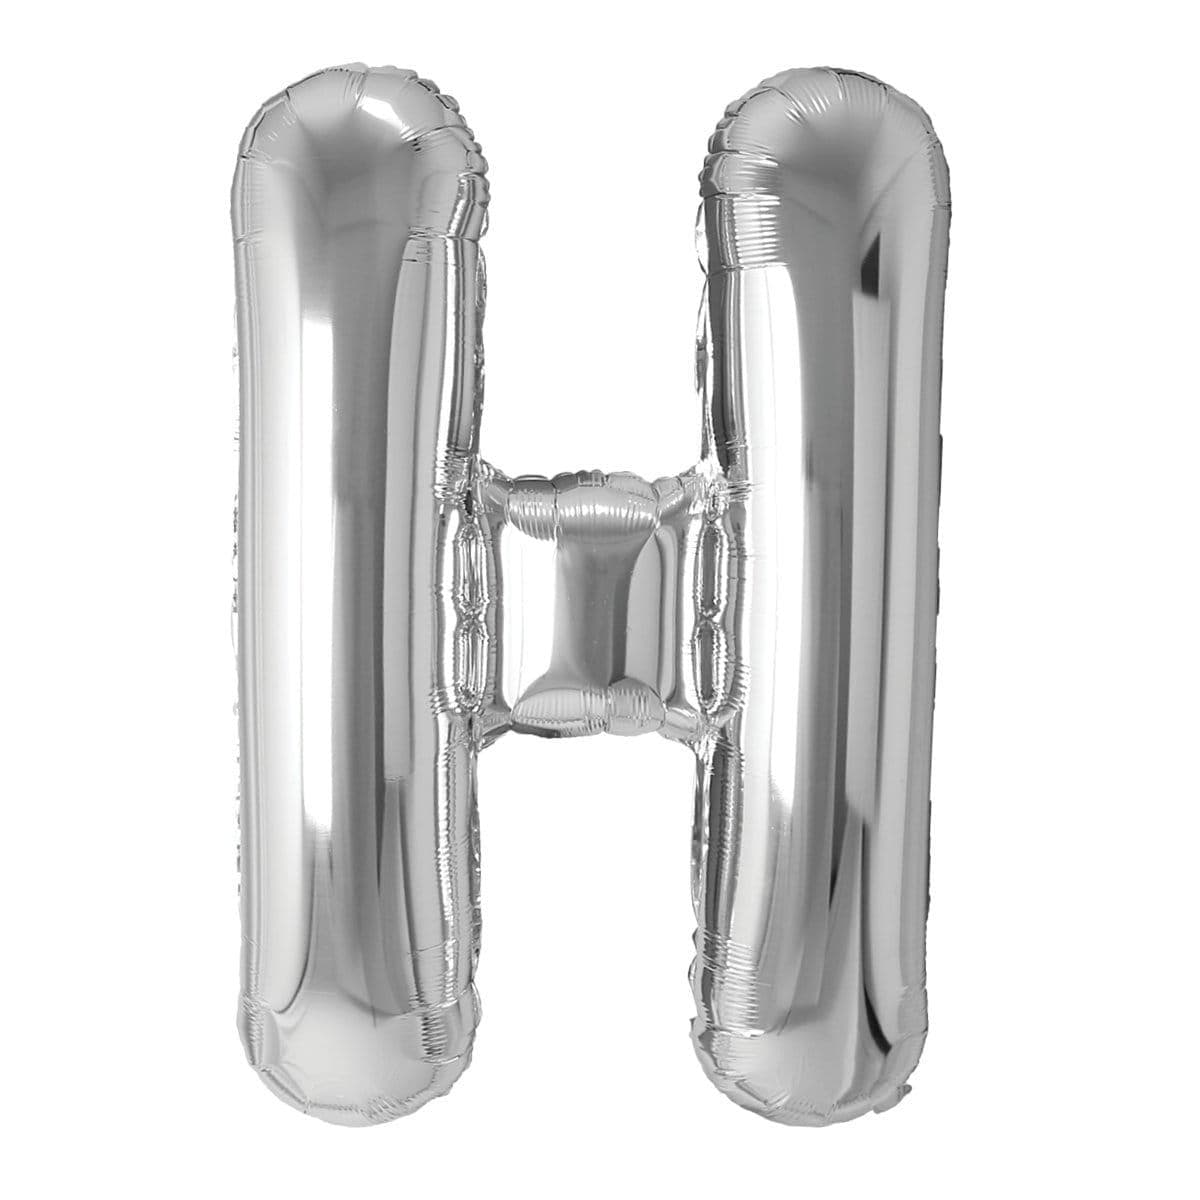 Buy Balloons Silver Letter H Foil Balloon, 34 Inches sold at Party Expert